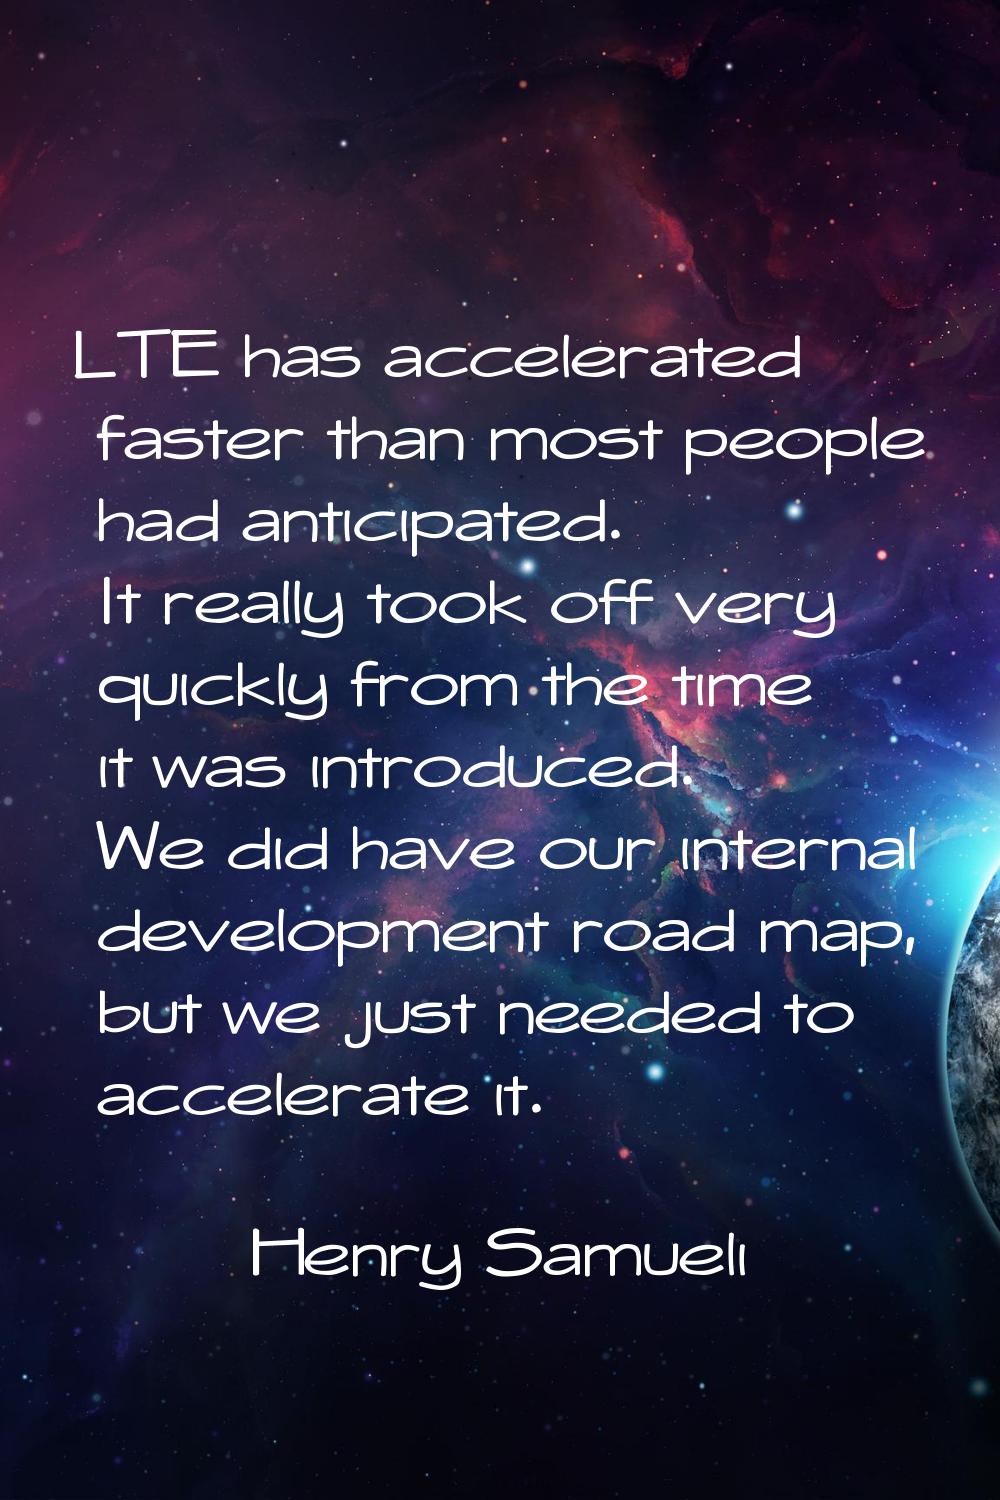 LTE has accelerated faster than most people had anticipated. It really took off very quickly from t